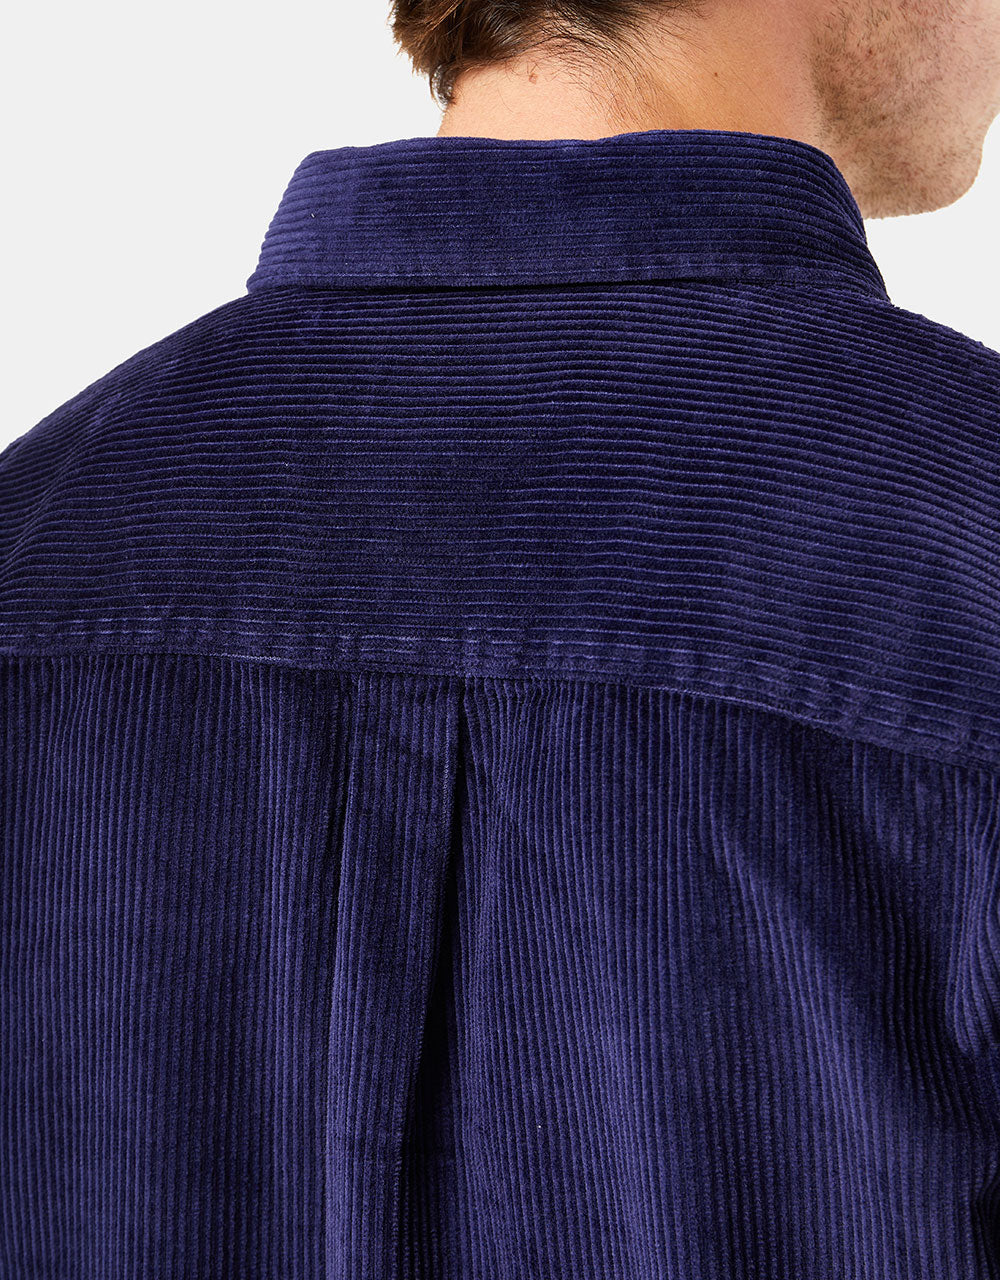 Route One Big Wale Cord Shirt - Navy